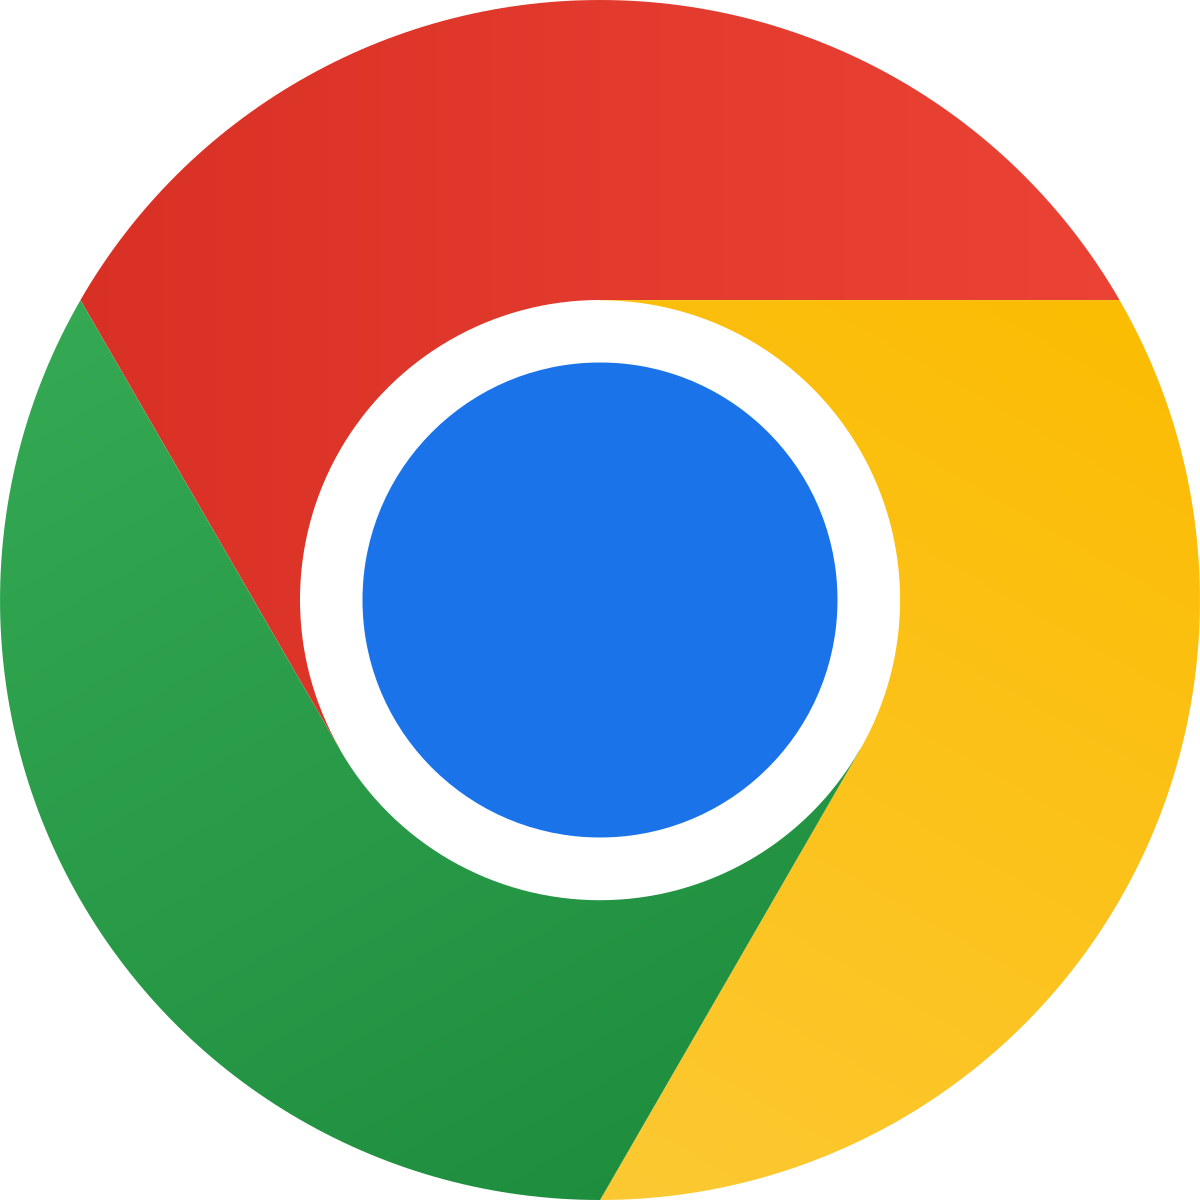 Chrome browser with a no entry sign